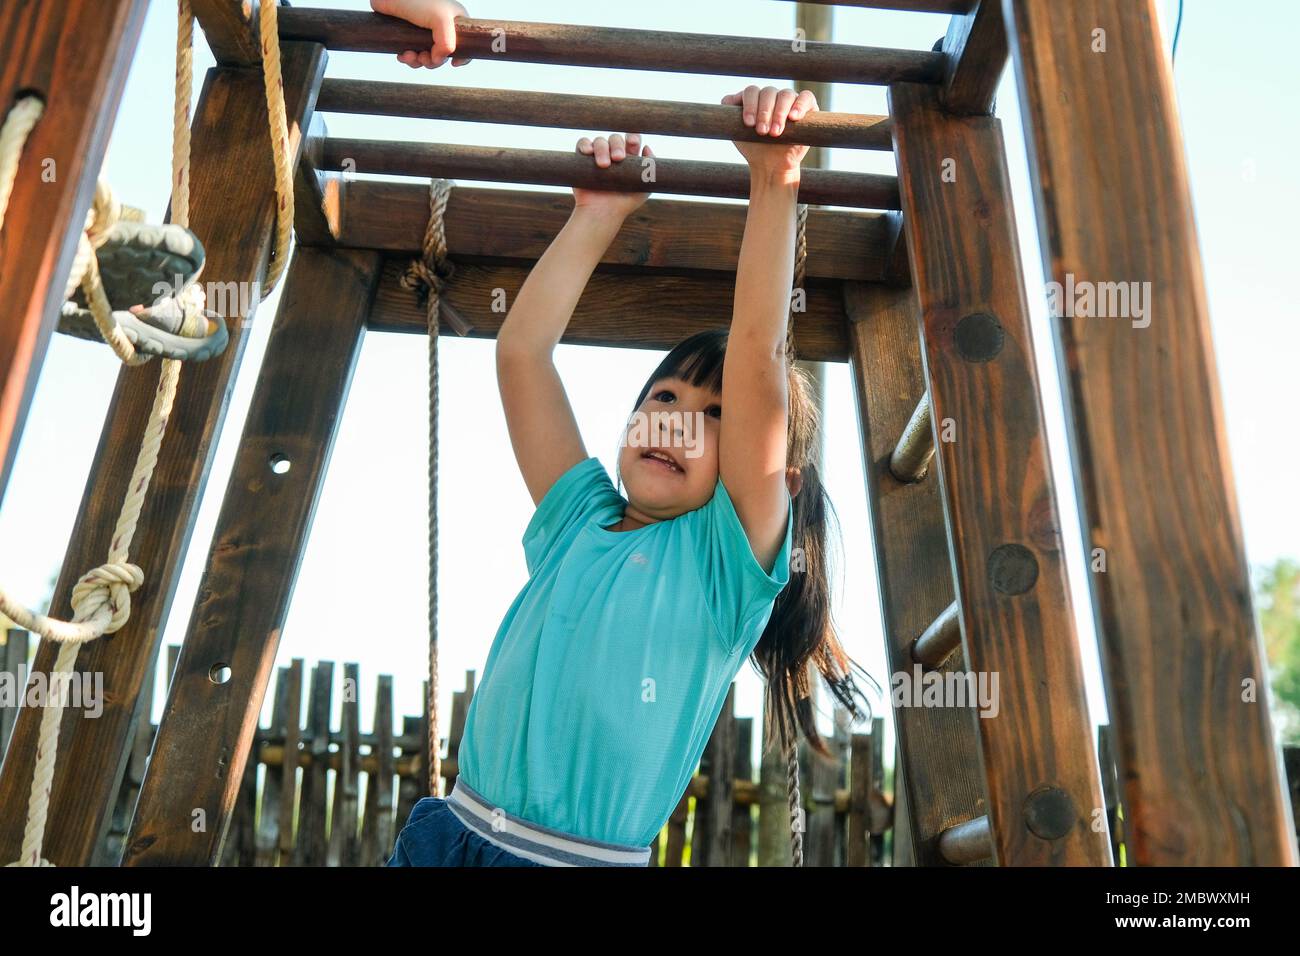 Little girl playing on playground, hanging on a horizontal bar. Active little girl exercising outdoors, hanging on monkey bars in the playground. Stock Photo